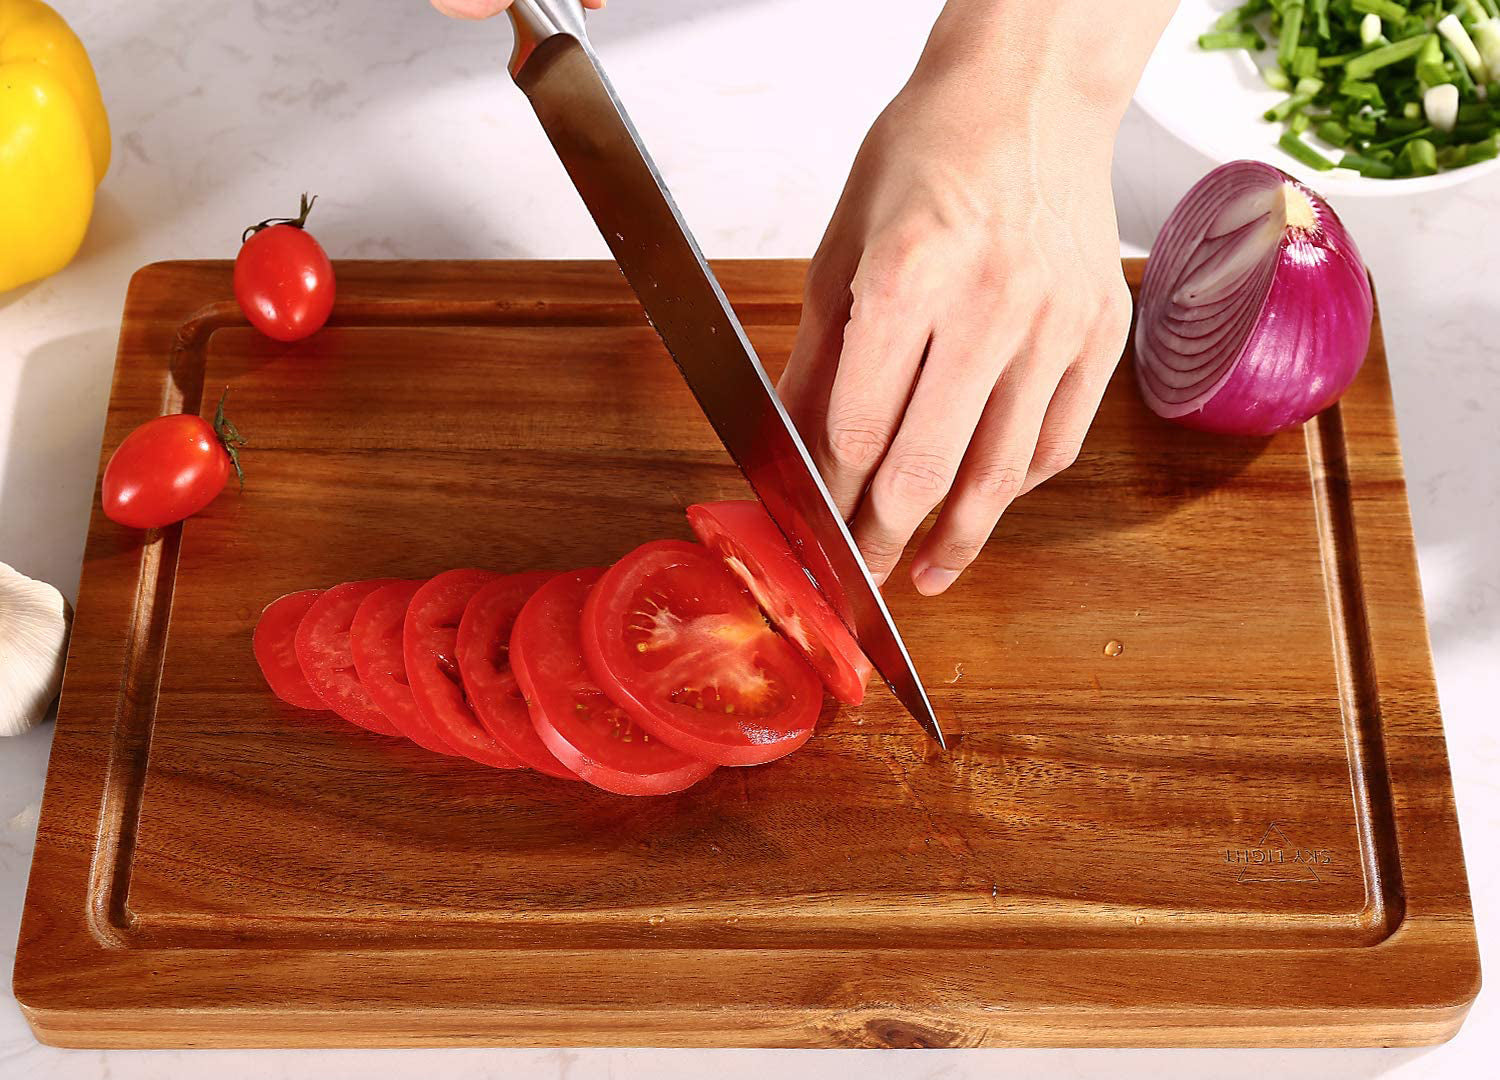 SKY LIGHT Cutting Board for Kitchen